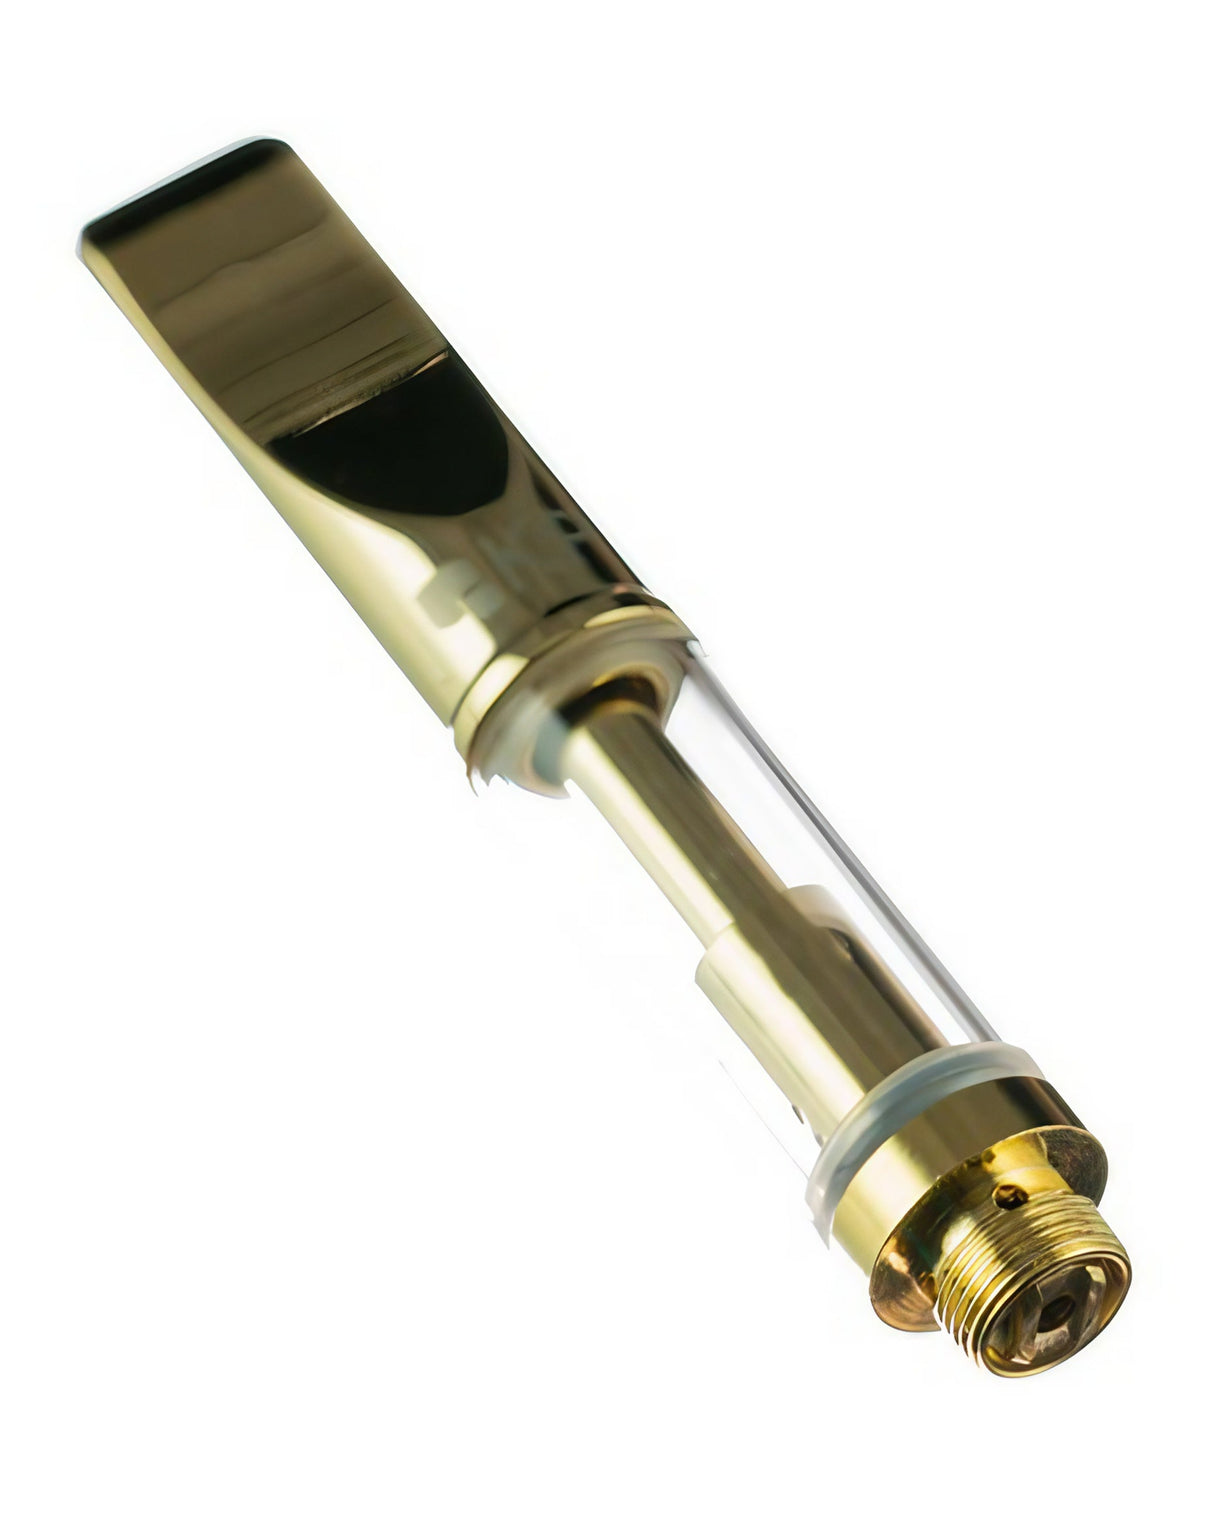 The Kind Pen Metal/Glass Wick Cartridge in Gold for Concentrates, Portable Design - Angled View